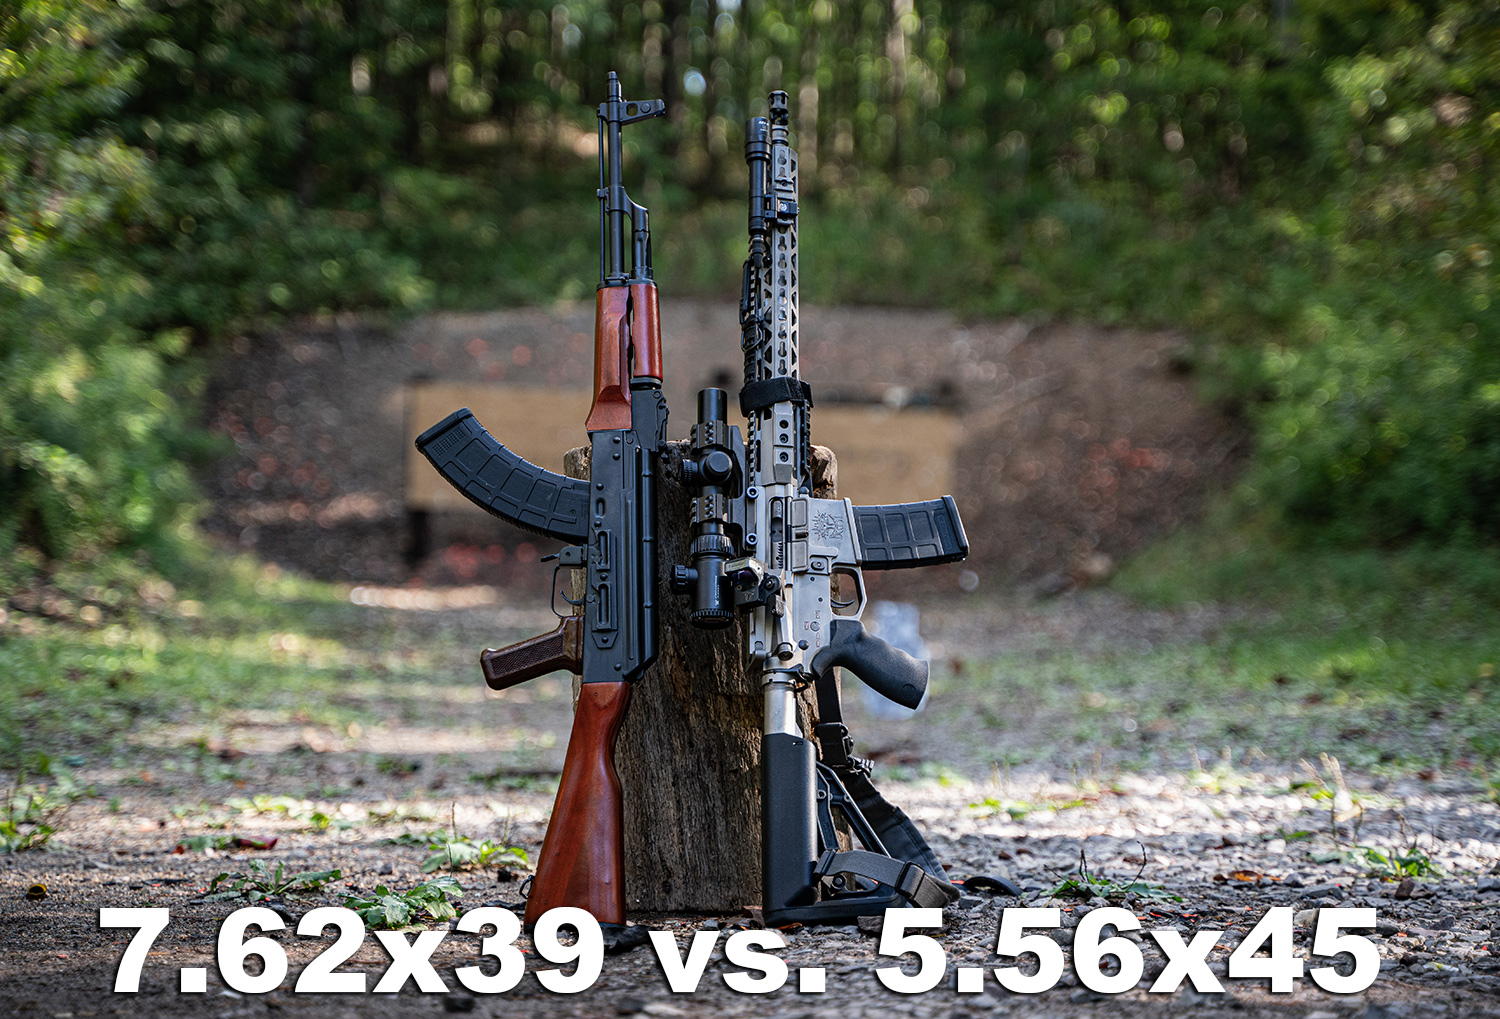 7.62x39 vs 5.56 rifles side by side at a shooting range